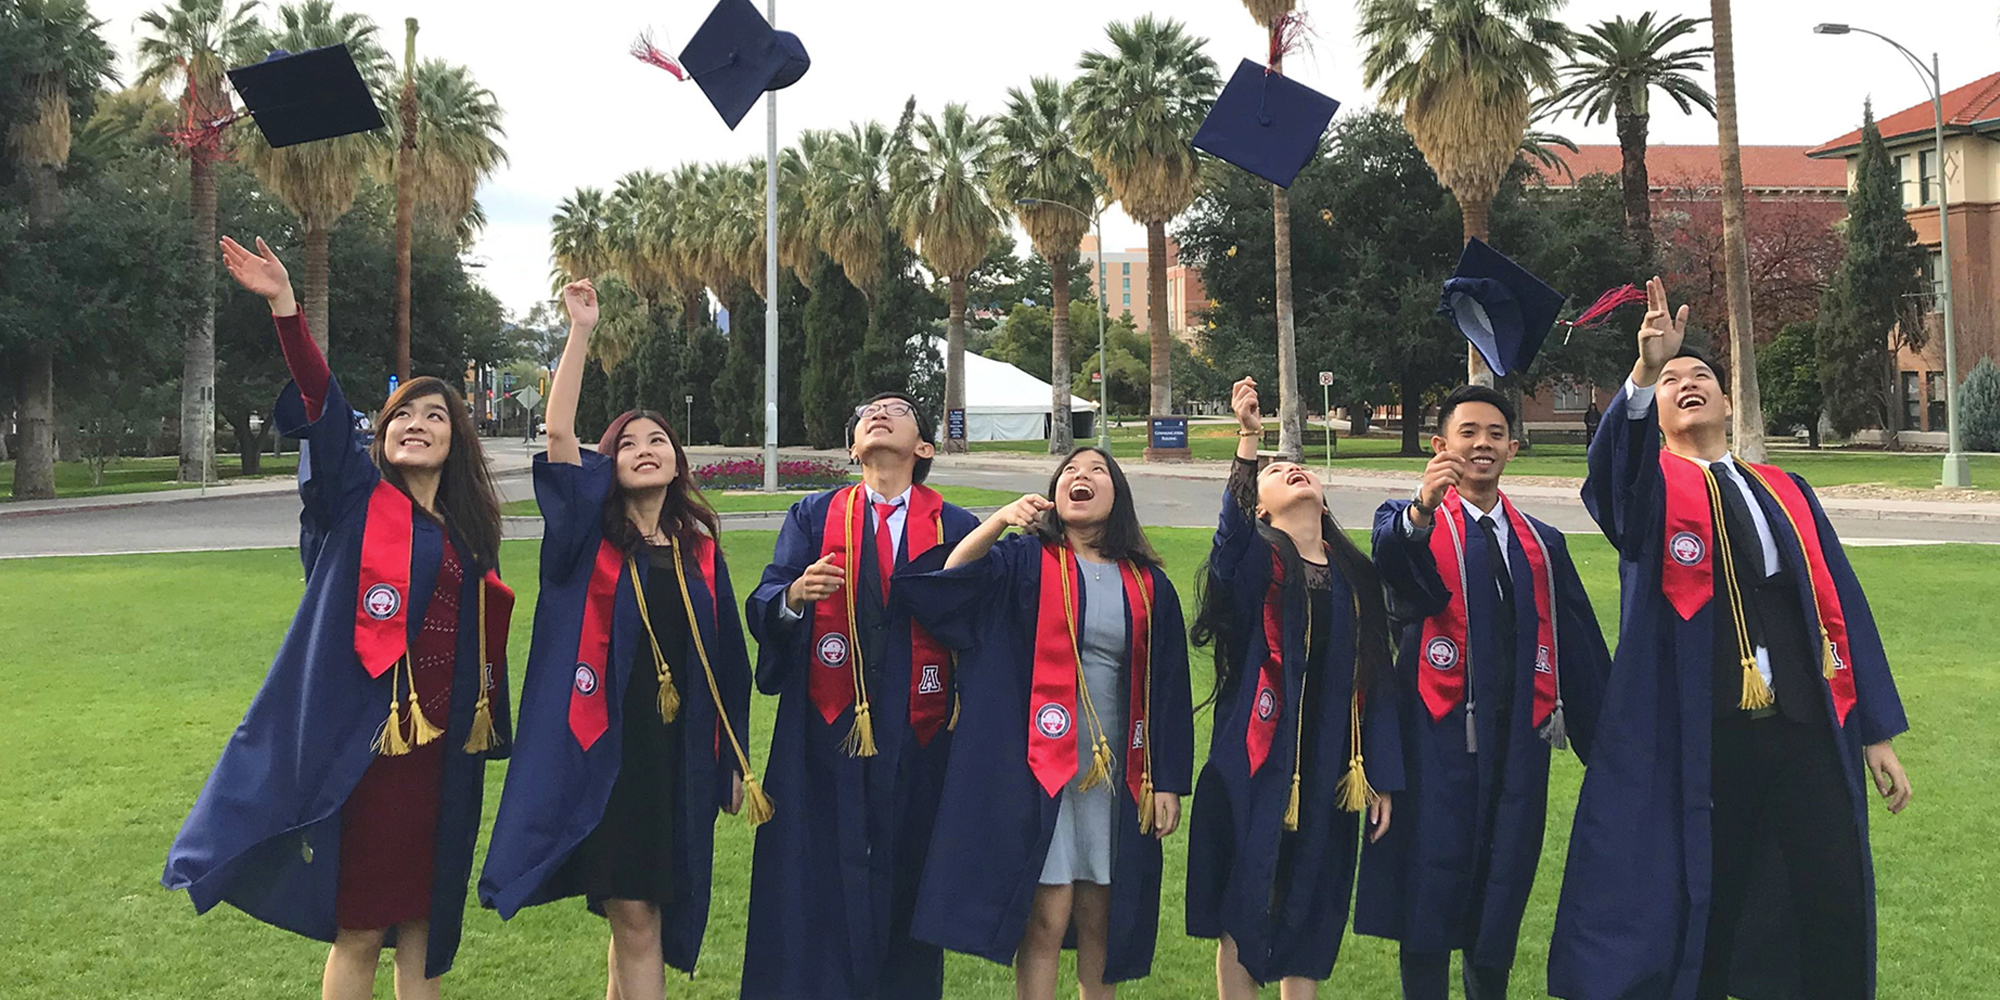 Seven International Dual Degree students at  UArizona wearing graduation gowns and throwing their graduation caps into the air